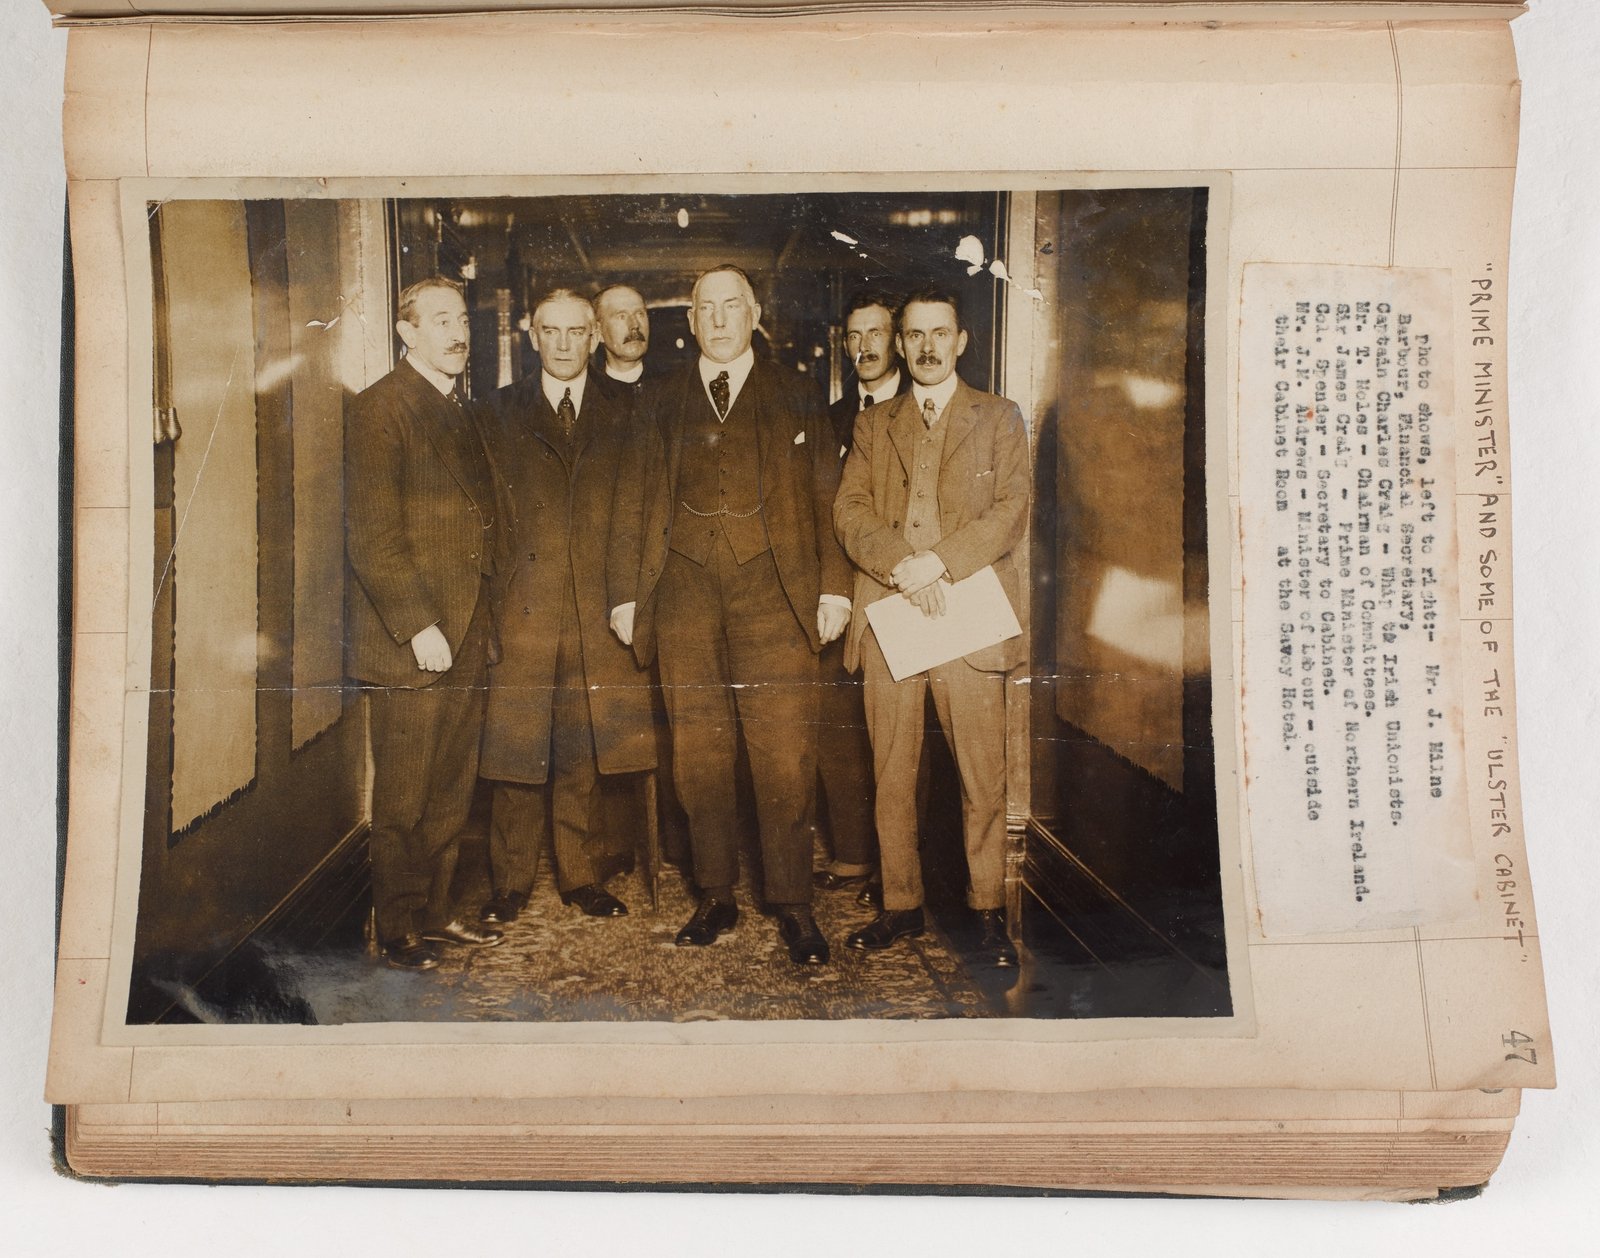 Image - Photo of Craig and some members of his Cabinet - as found in an IRA Intelligence file, along with photos of British Army and Police officers marked for surveillance or death (© National Museum of Ireland and the Gerry Fitzpatrick Family)